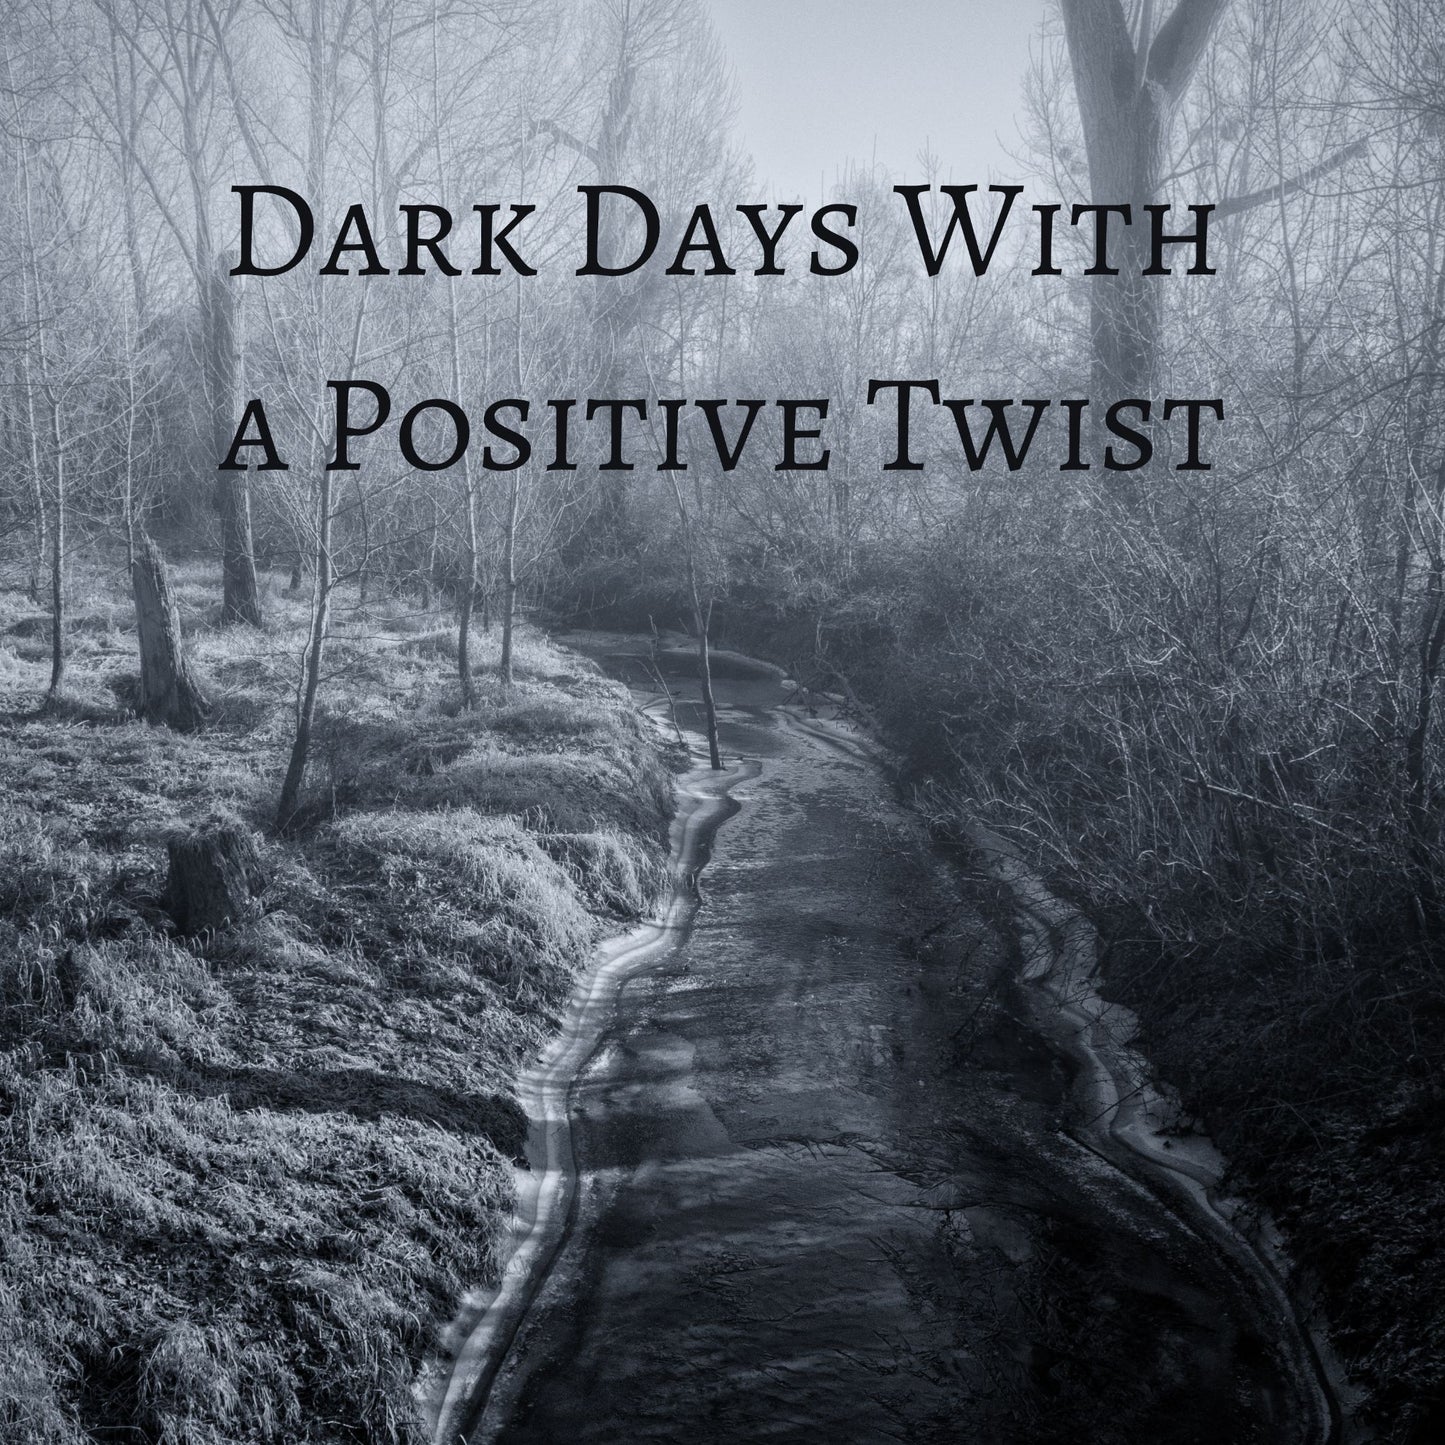 CD Cover of song Dark Days with a Positive Twist